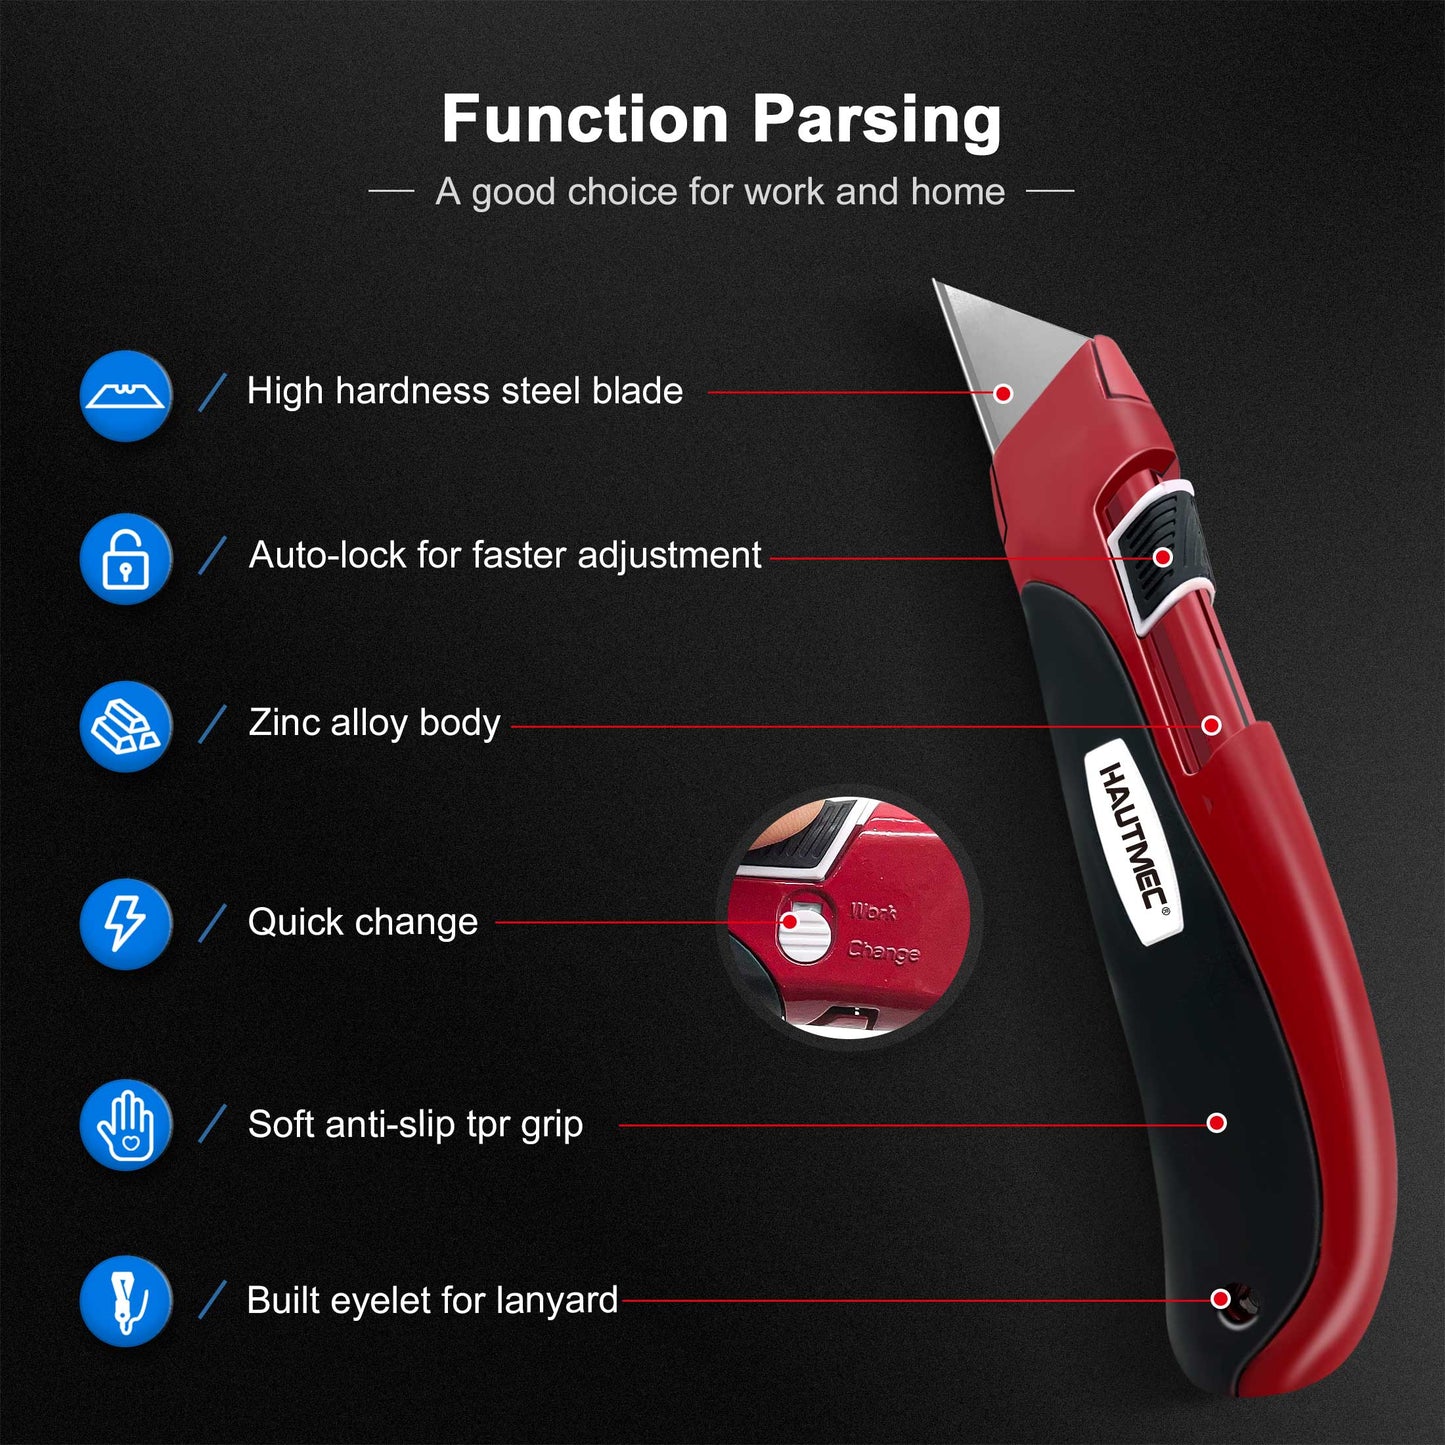 HAUTMEC High Safety Utility Knife With Double Self-Retraction Mechnism, Automatic Blade Retraction After Cuts & Self-retraction by Release Push Button, Self-retracting Box Cutter HT0195-KN